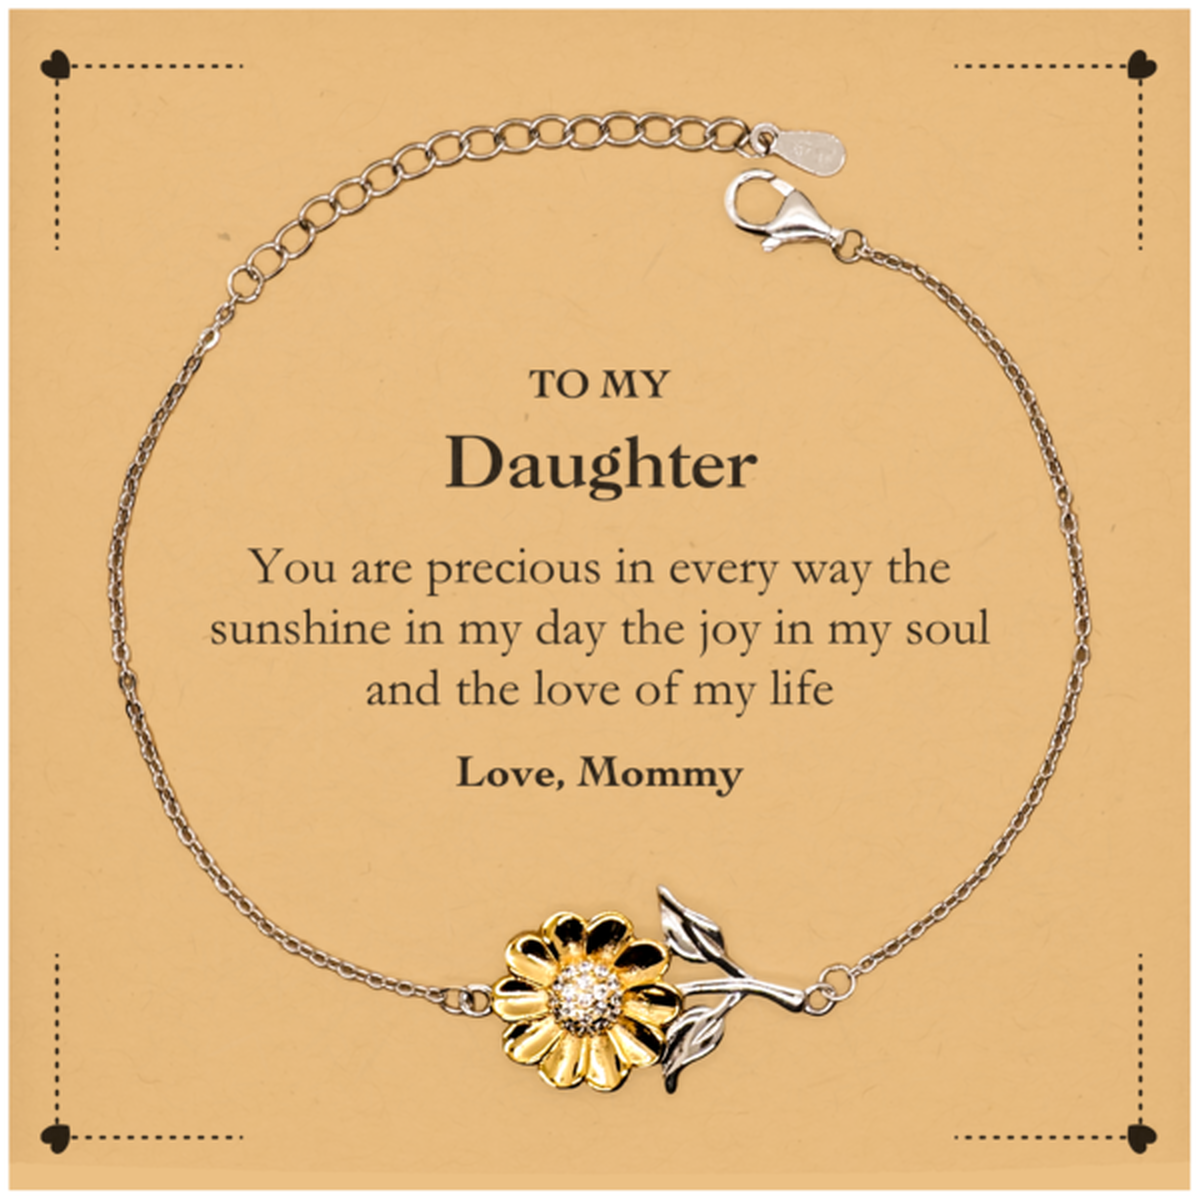 Graduation Gifts for Daughter Sunflower Bracelet Present from Mommy, Christmas Daughter Birthday Gifts Daughter You are precious in every way the sunshine in my day. Love, Mommy